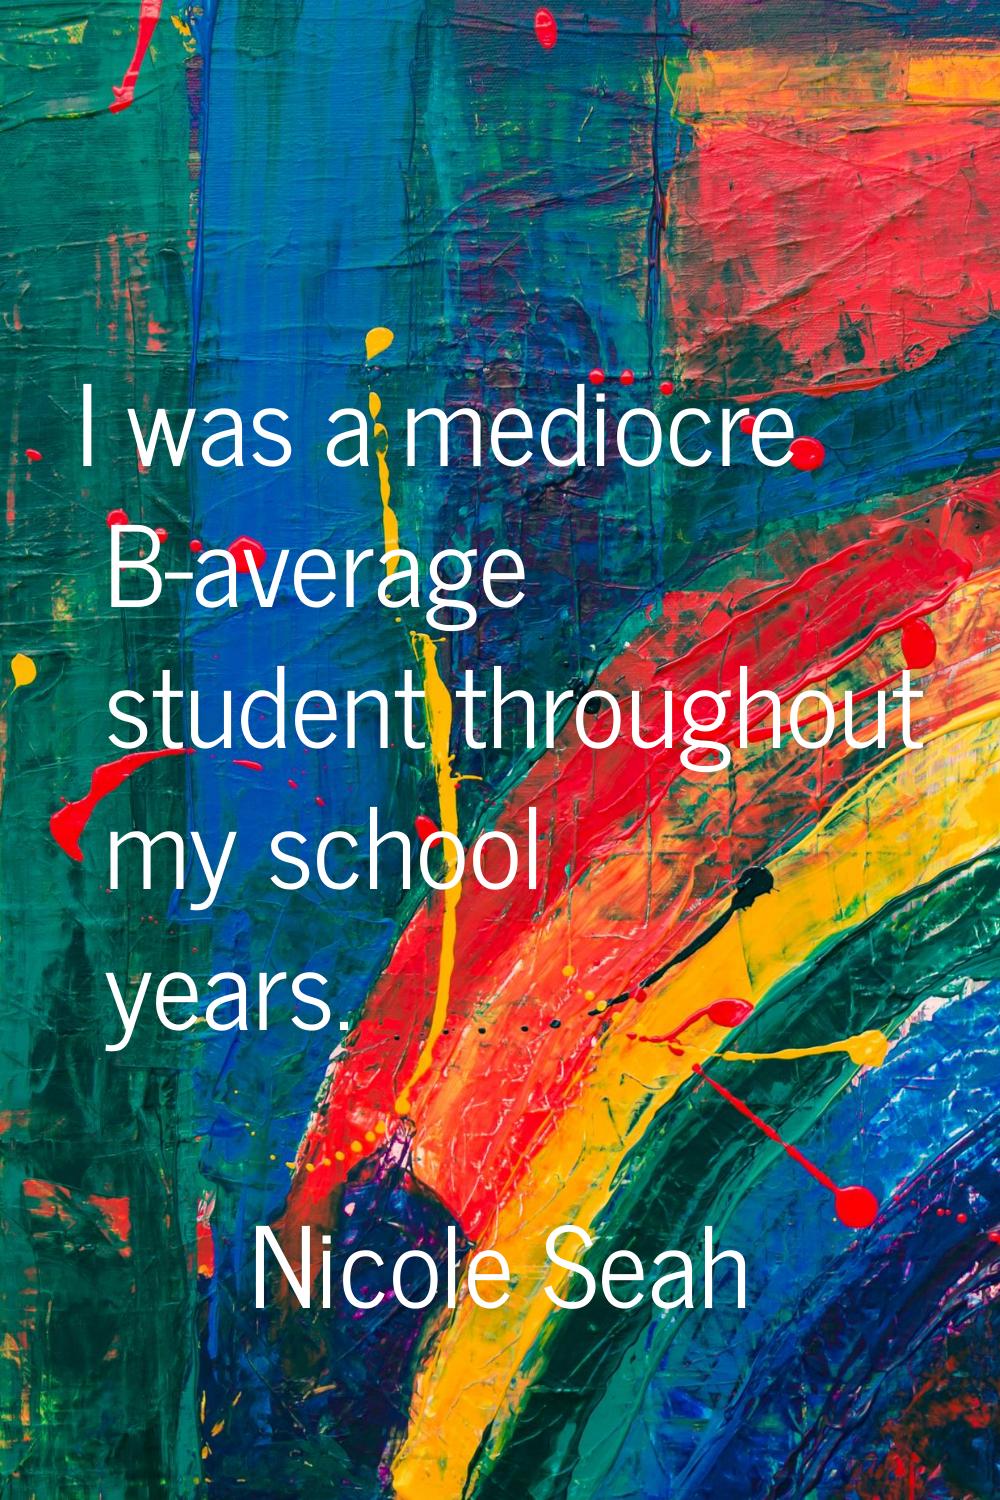 I was a mediocre B-average student throughout my school years.